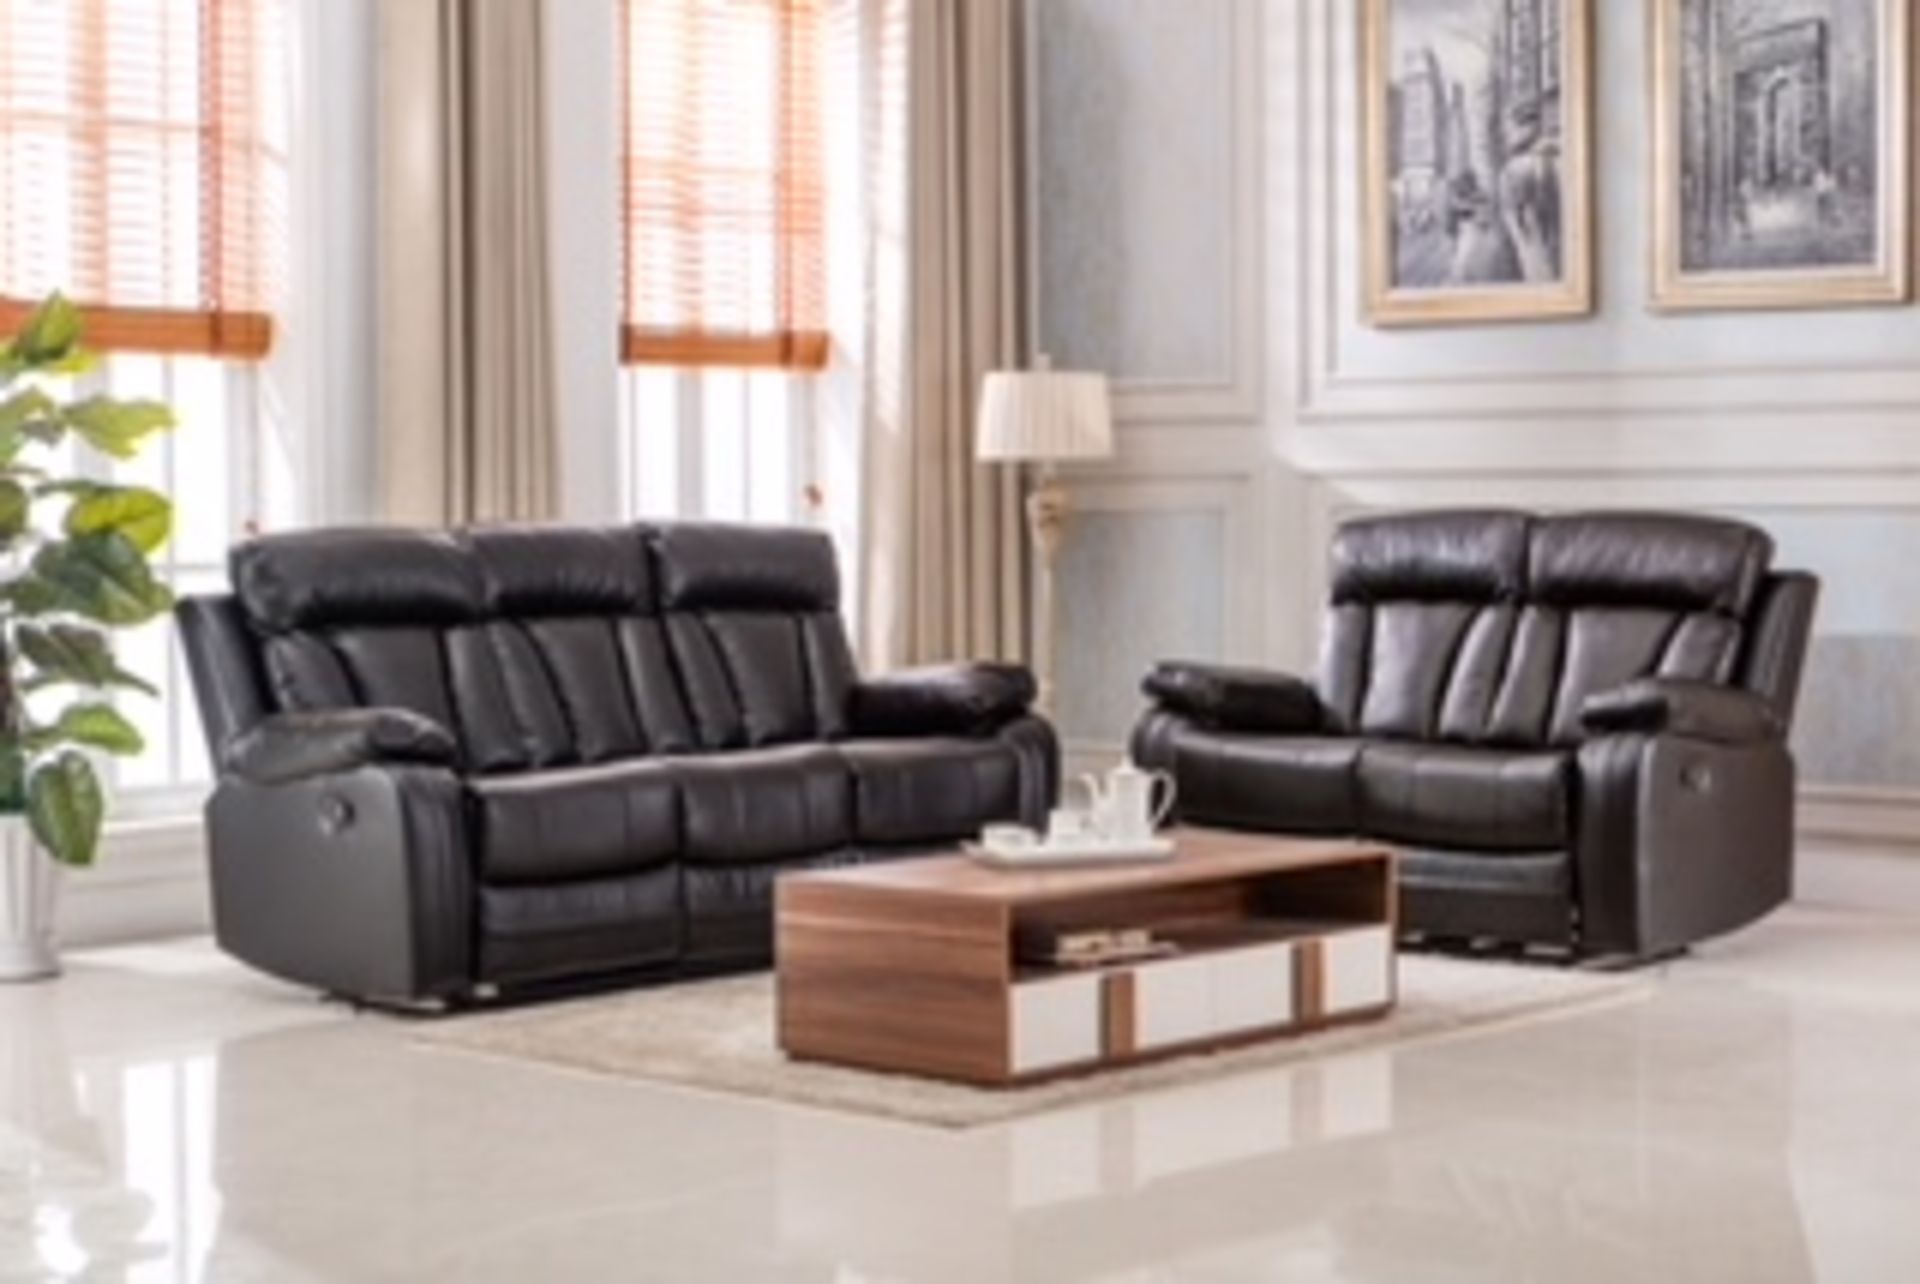 Brand New Boxed 3 Seater Plus 2 Seater Manhattan Black Leather Electric Reclining Sofas